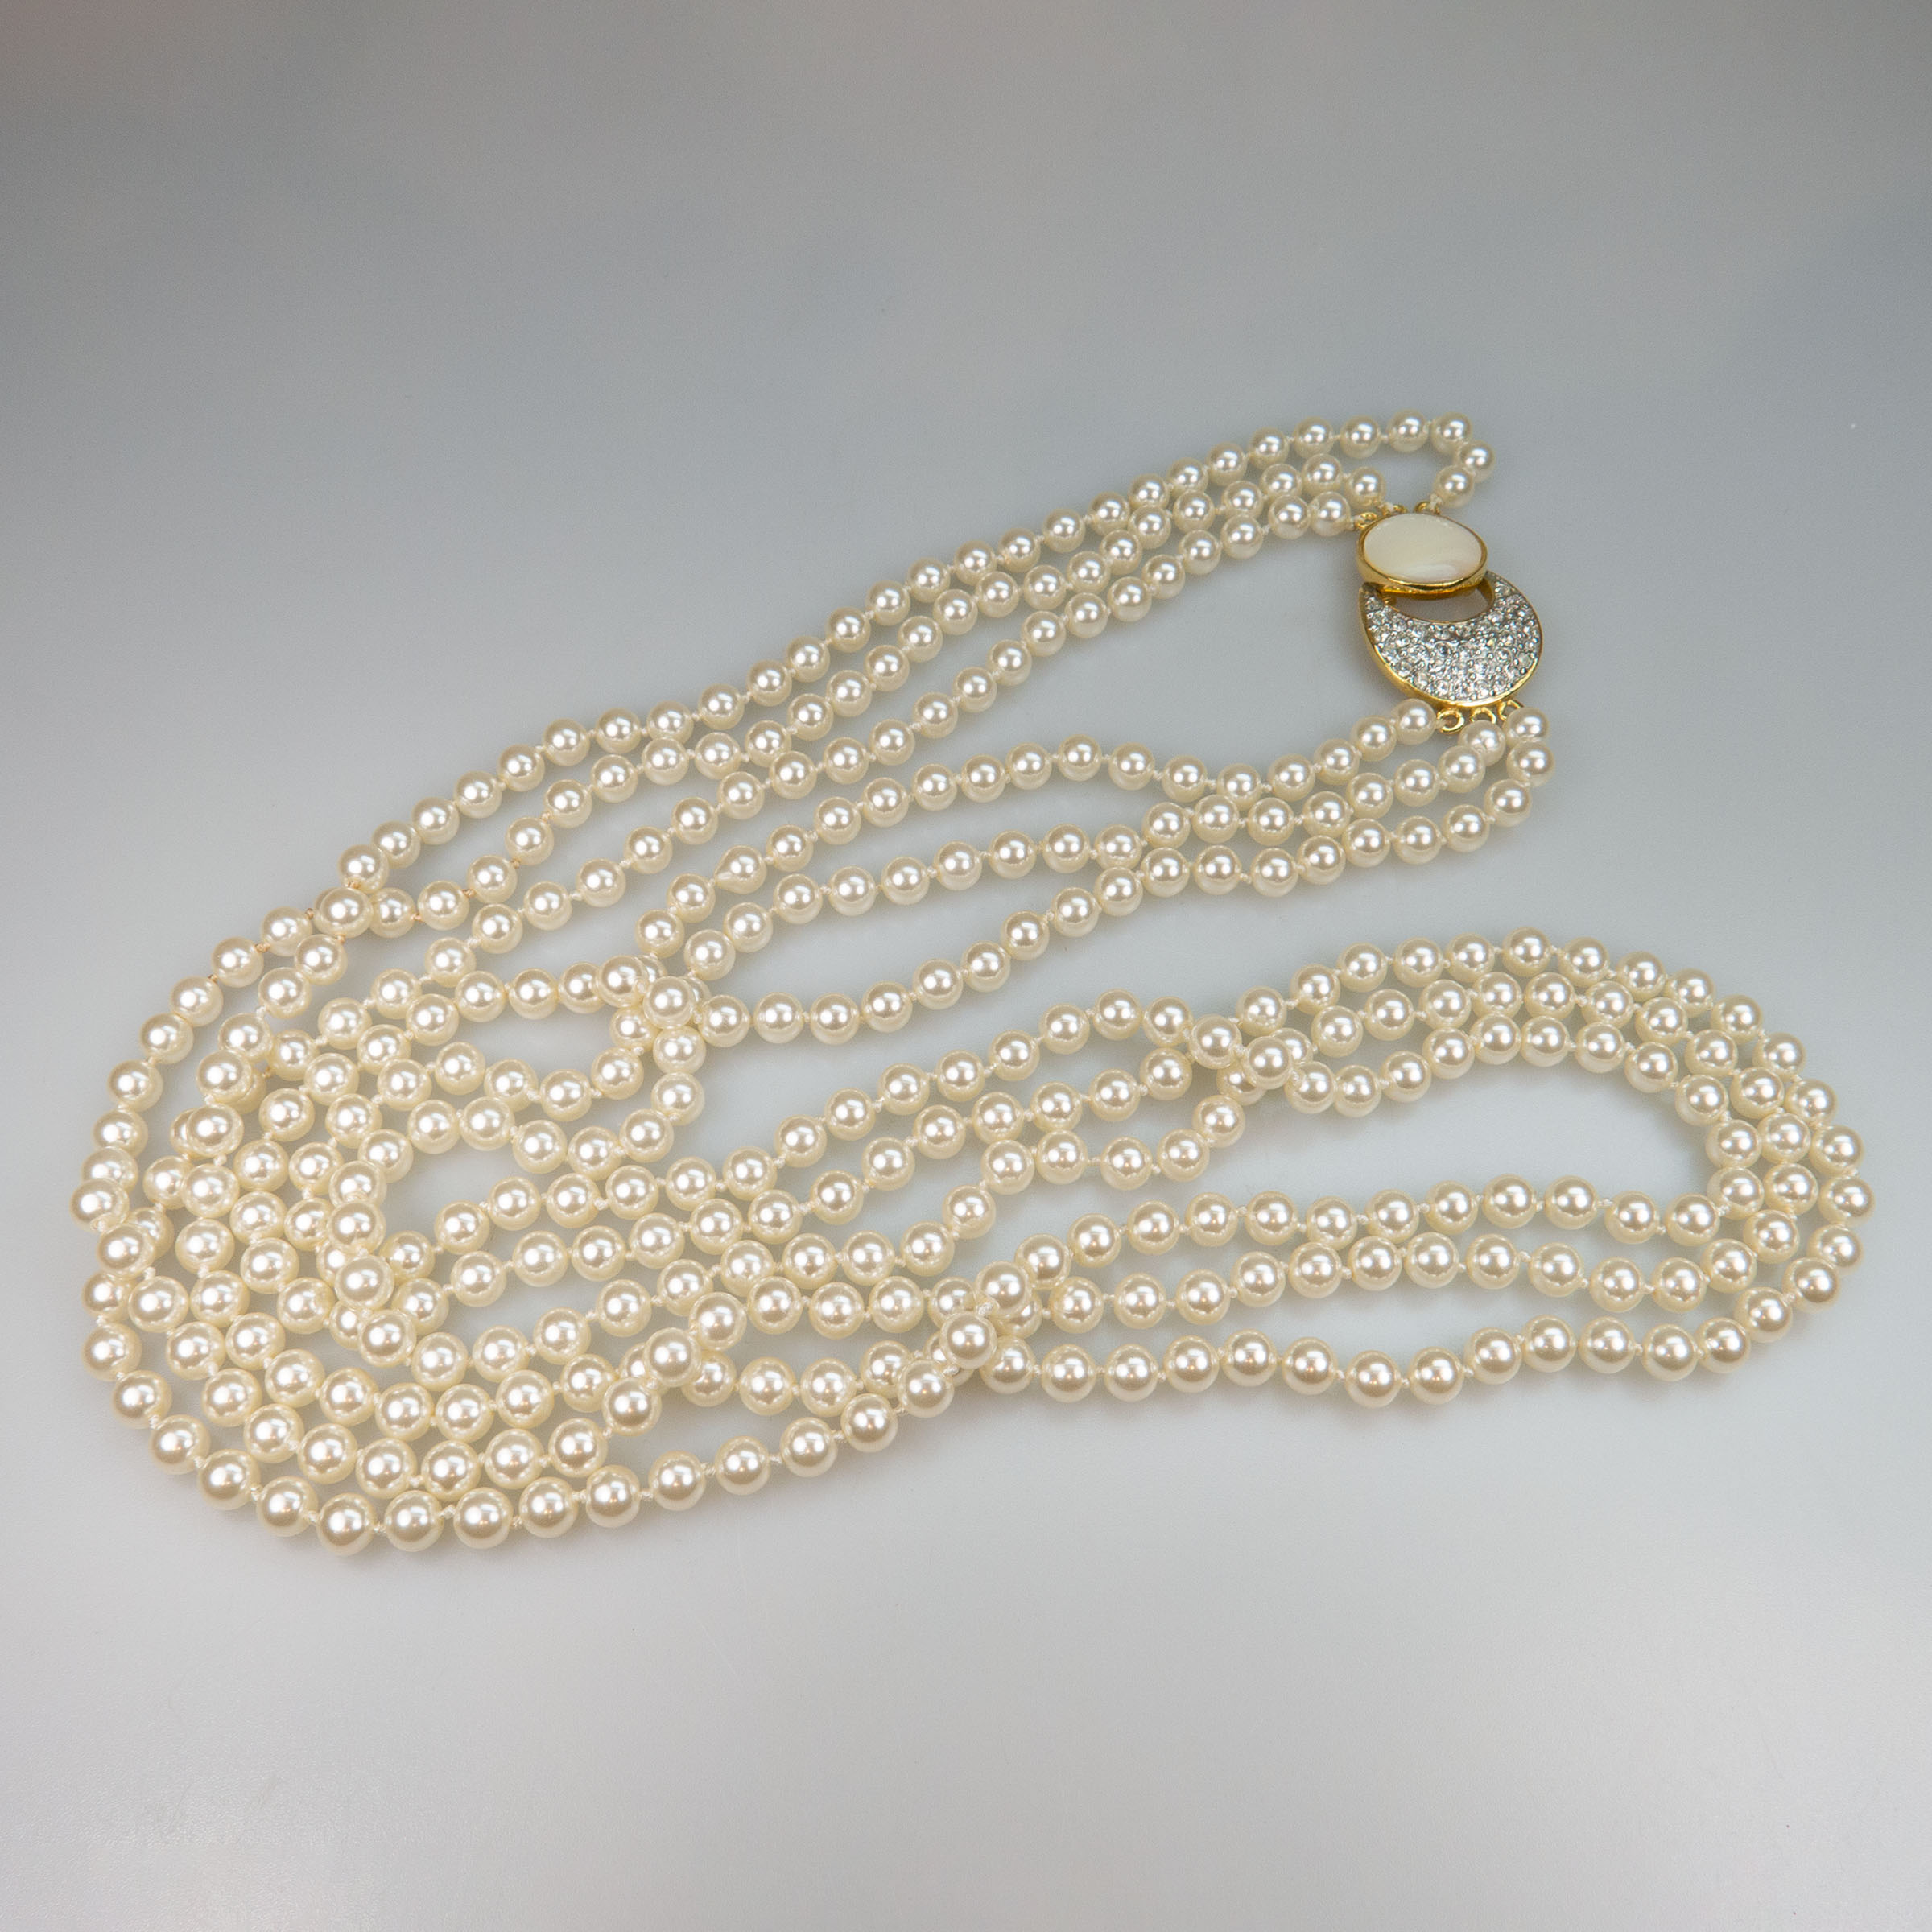 Butler Multi-Strand Faux Pearl Necklace